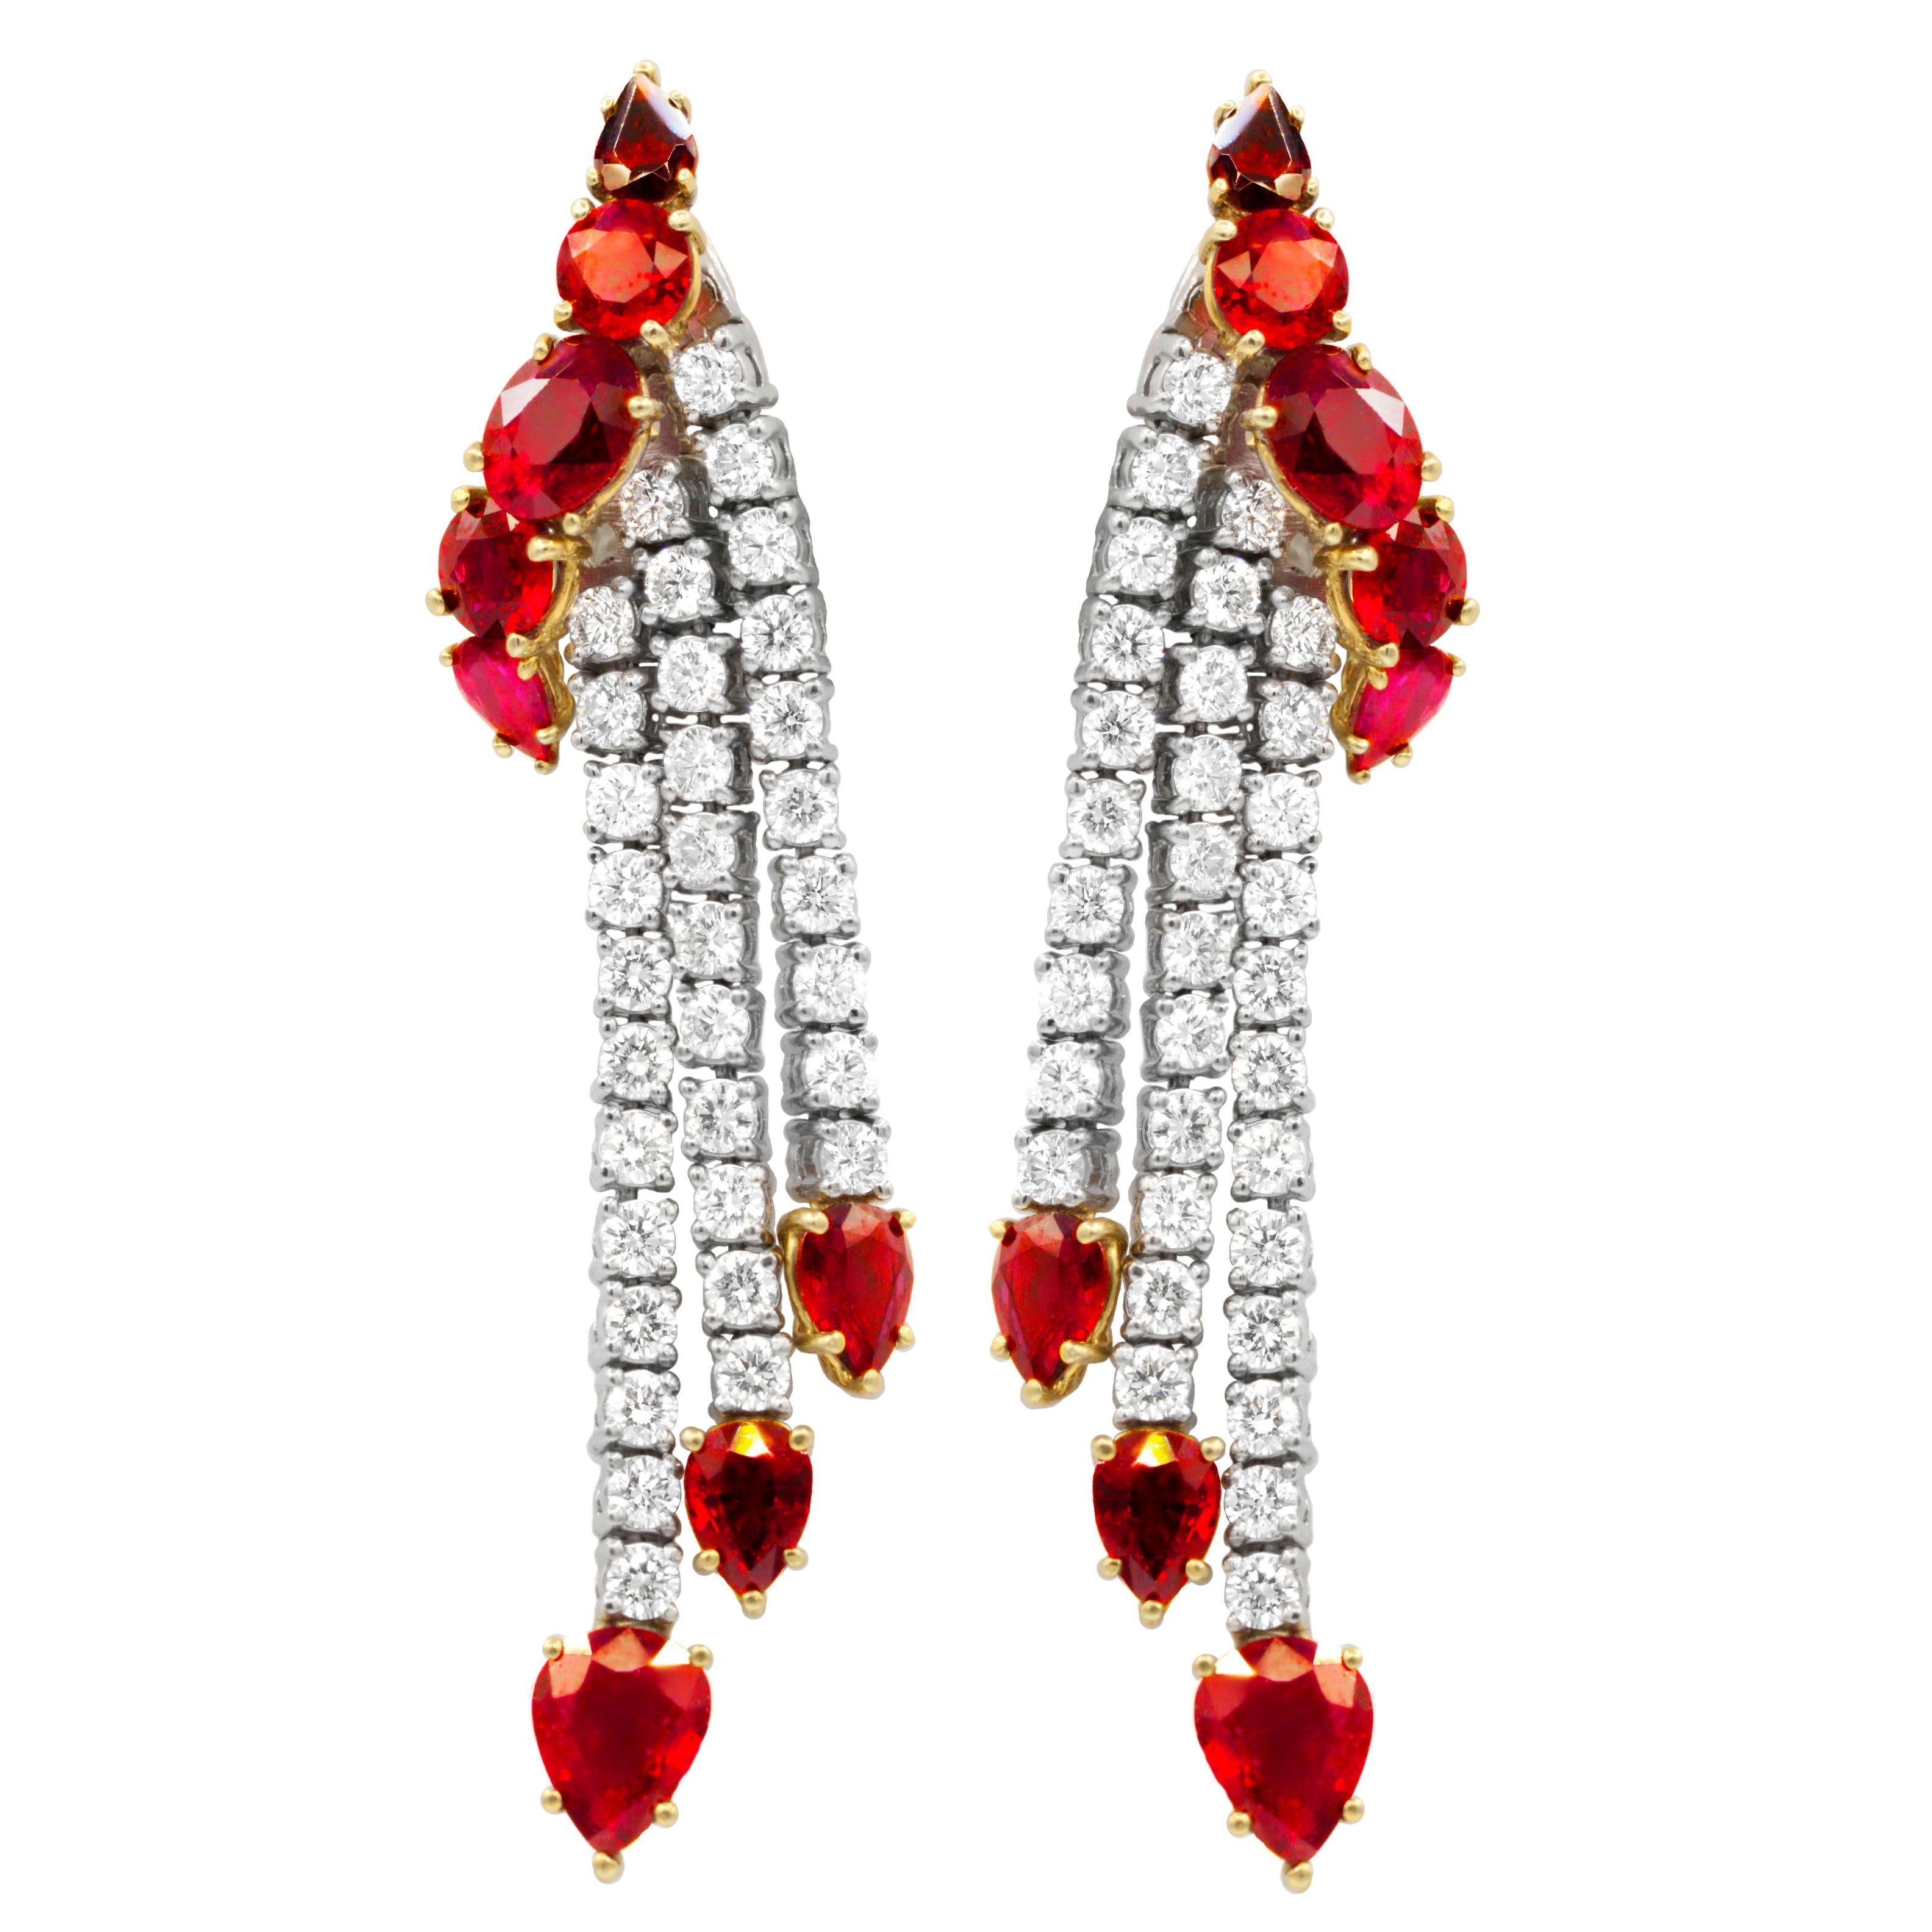 18kt yellow gold and platinum earrings features 14.80 carats of rubies and 7.60 carats of diamondsDiana 